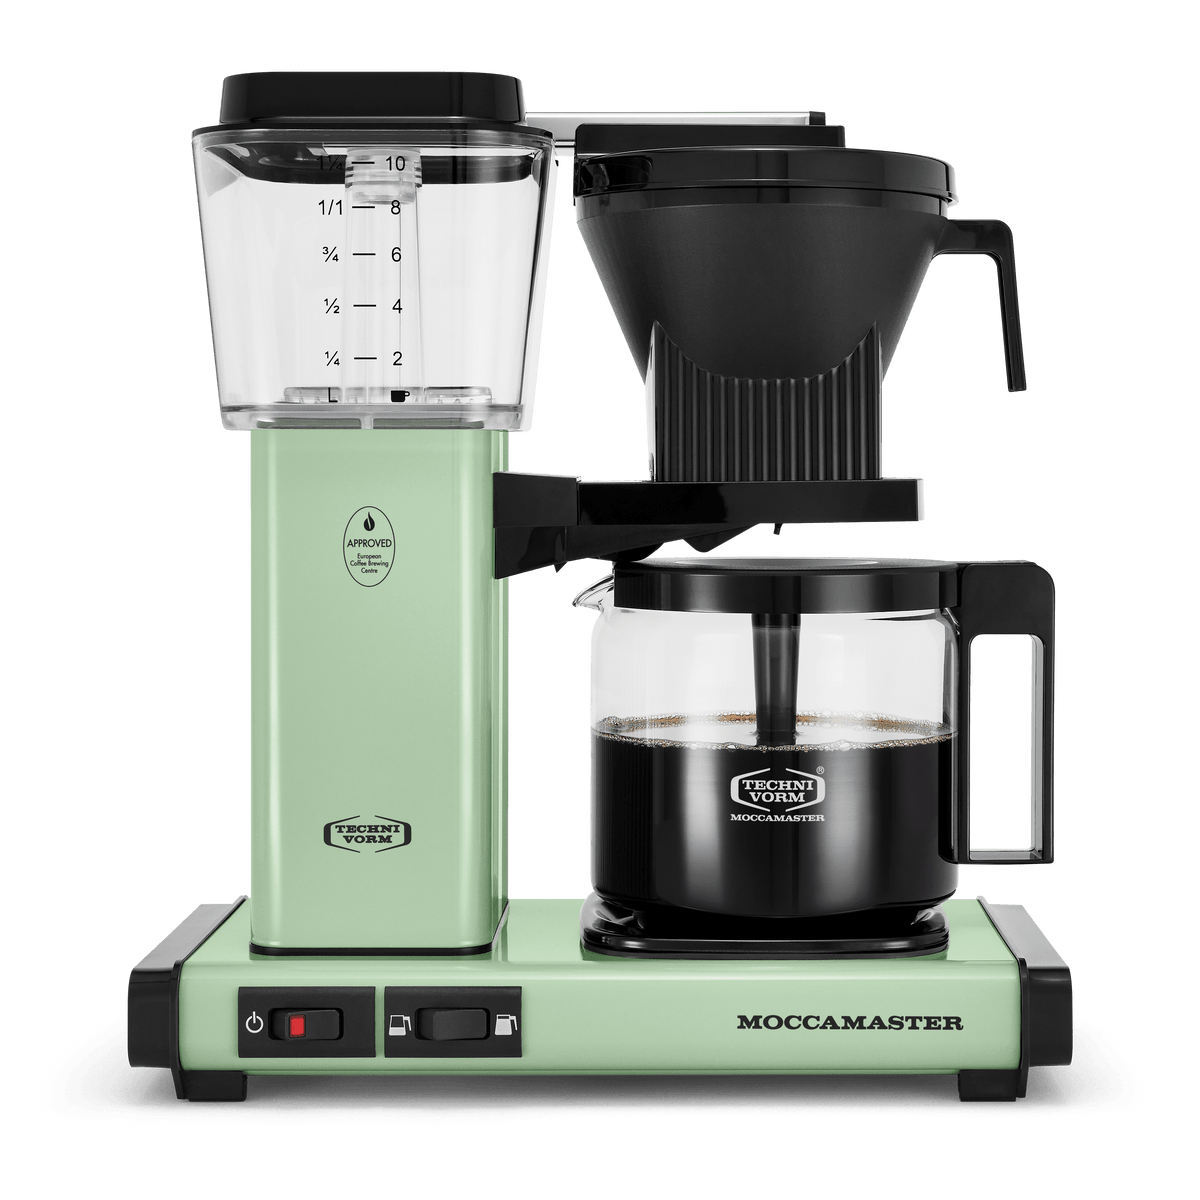 Front shot showing Moccamaster KBGV Select in Pistachio, with rectangular tower and base, clear acrylic water reservoir with fill level marks, power and volume selector switch, glass carafe with black handle, and black automatic brew basket.